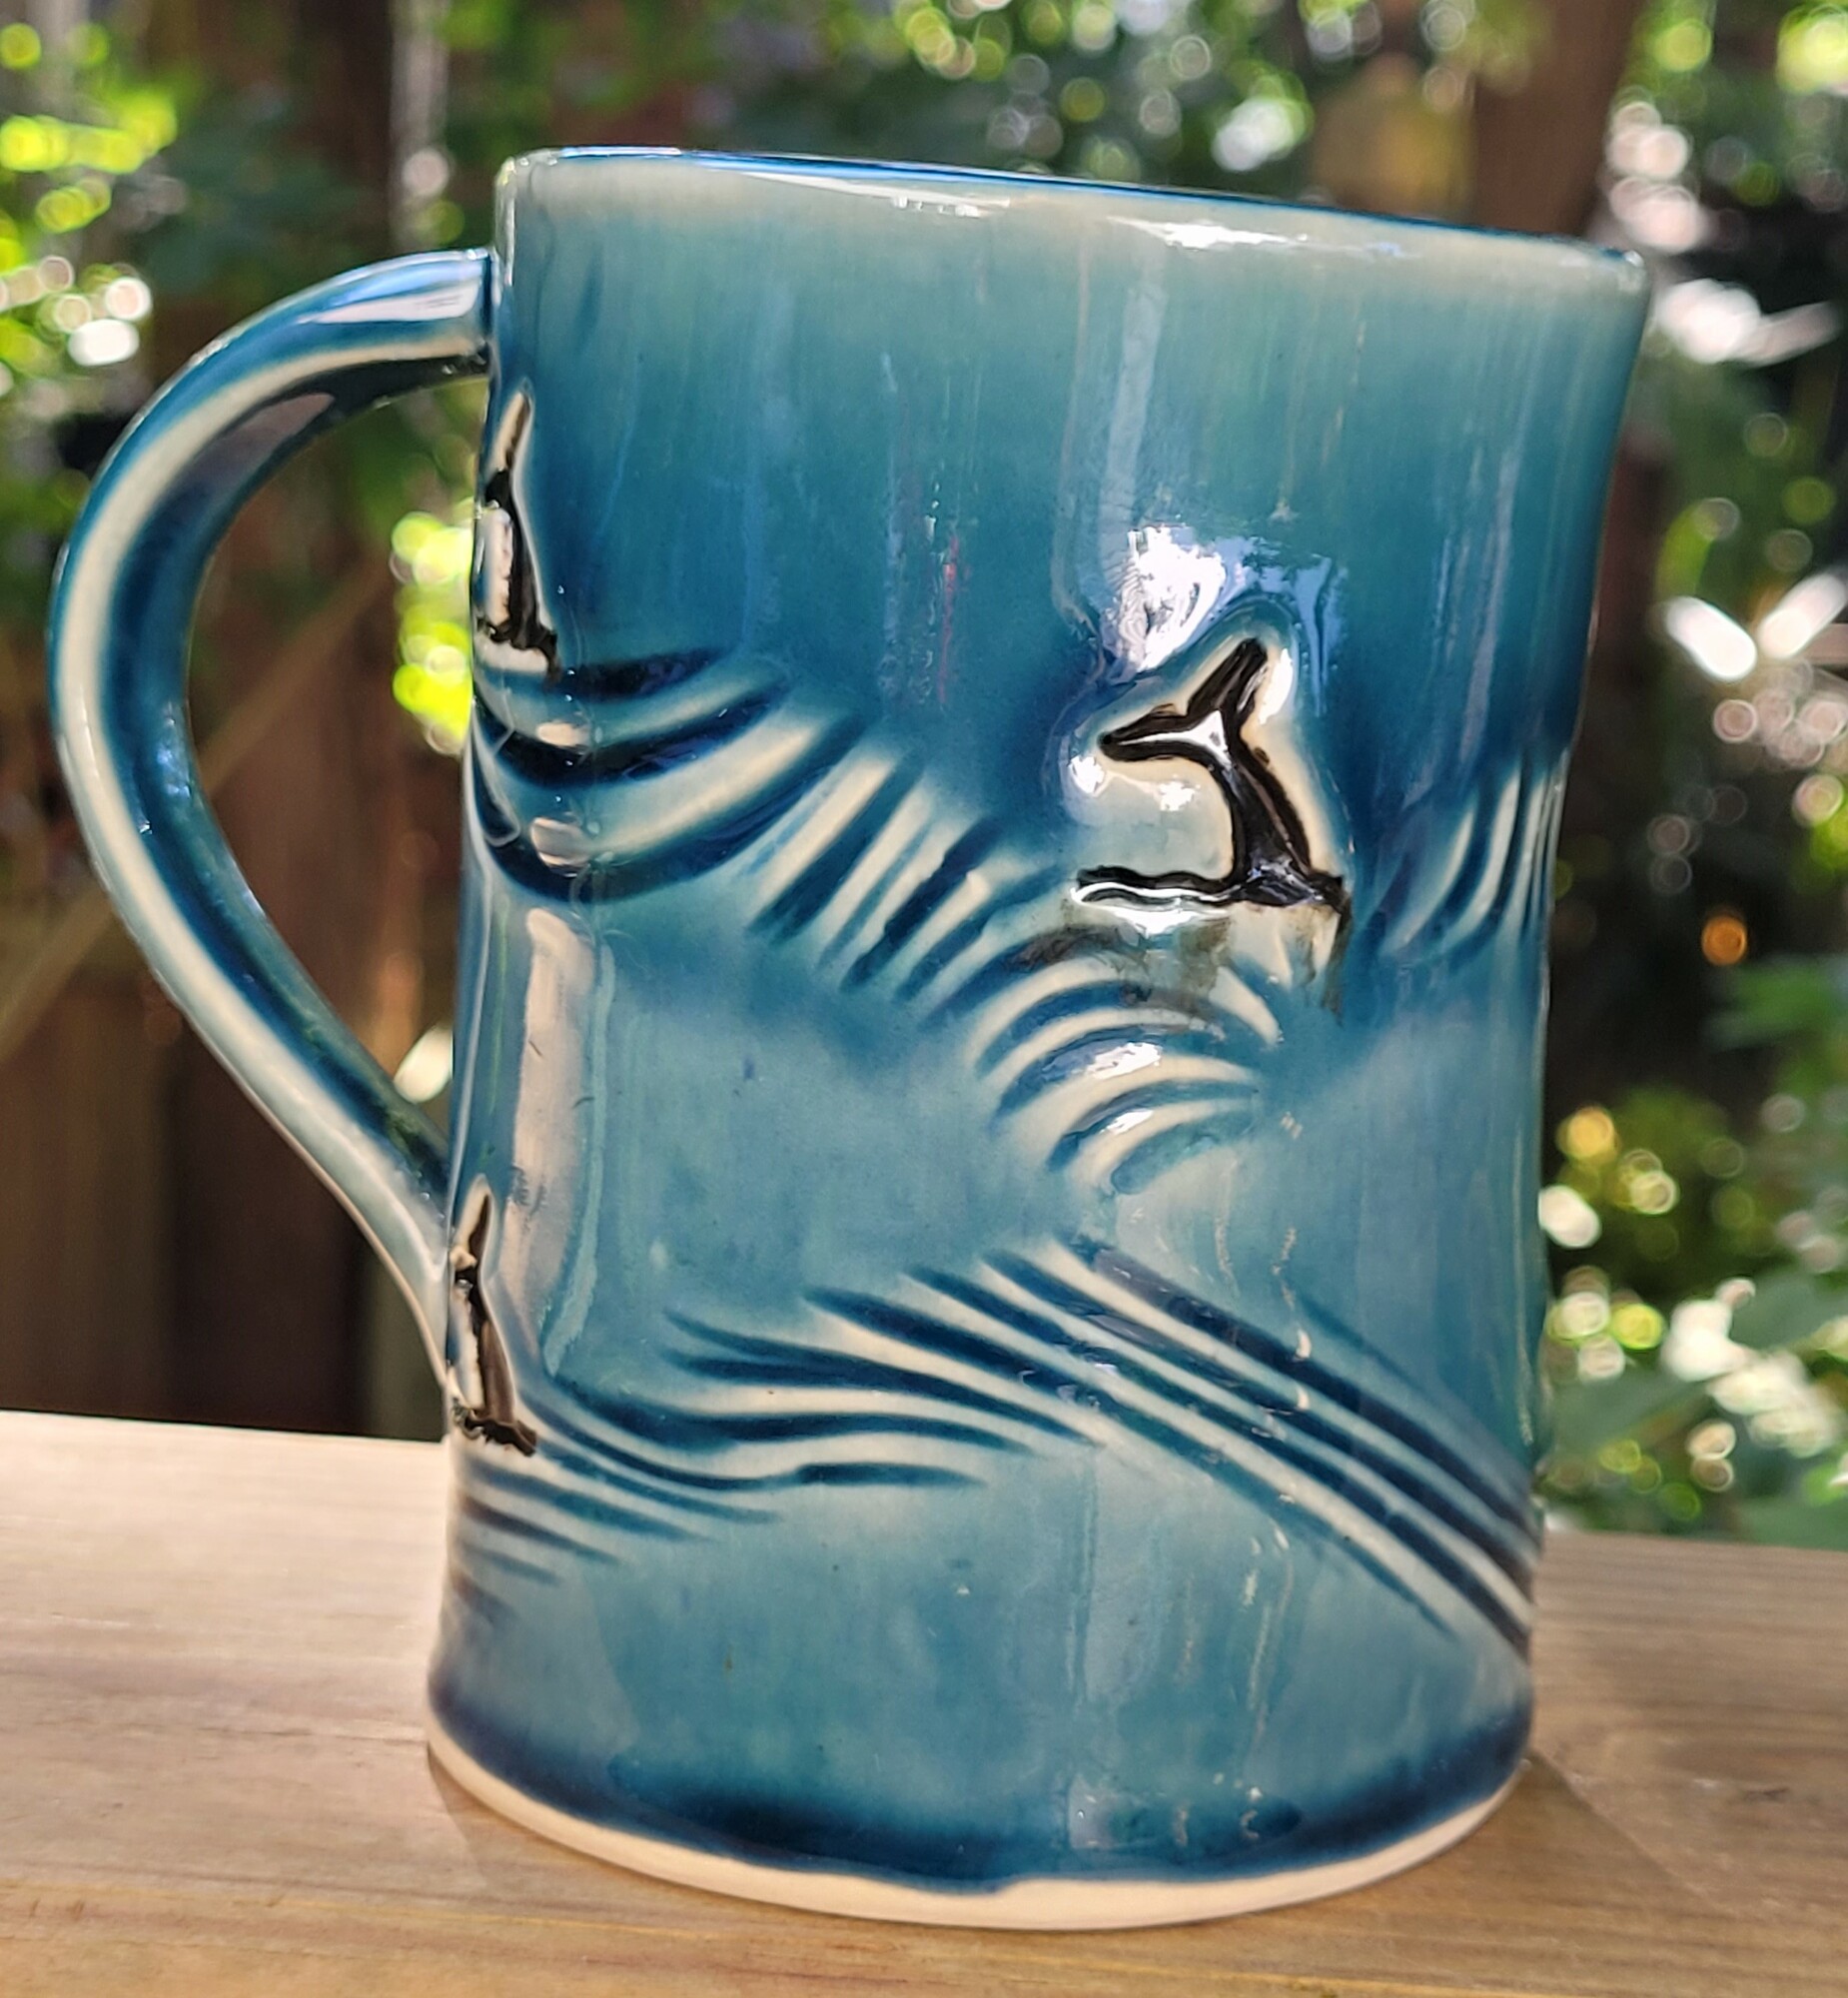 Whale Mug
Artist:  Pam Gray
Ceramic handbuilt mug holds 12 oz.
This mug is microwave and dishwasher safe but hand washing recommended.
Price $32.00